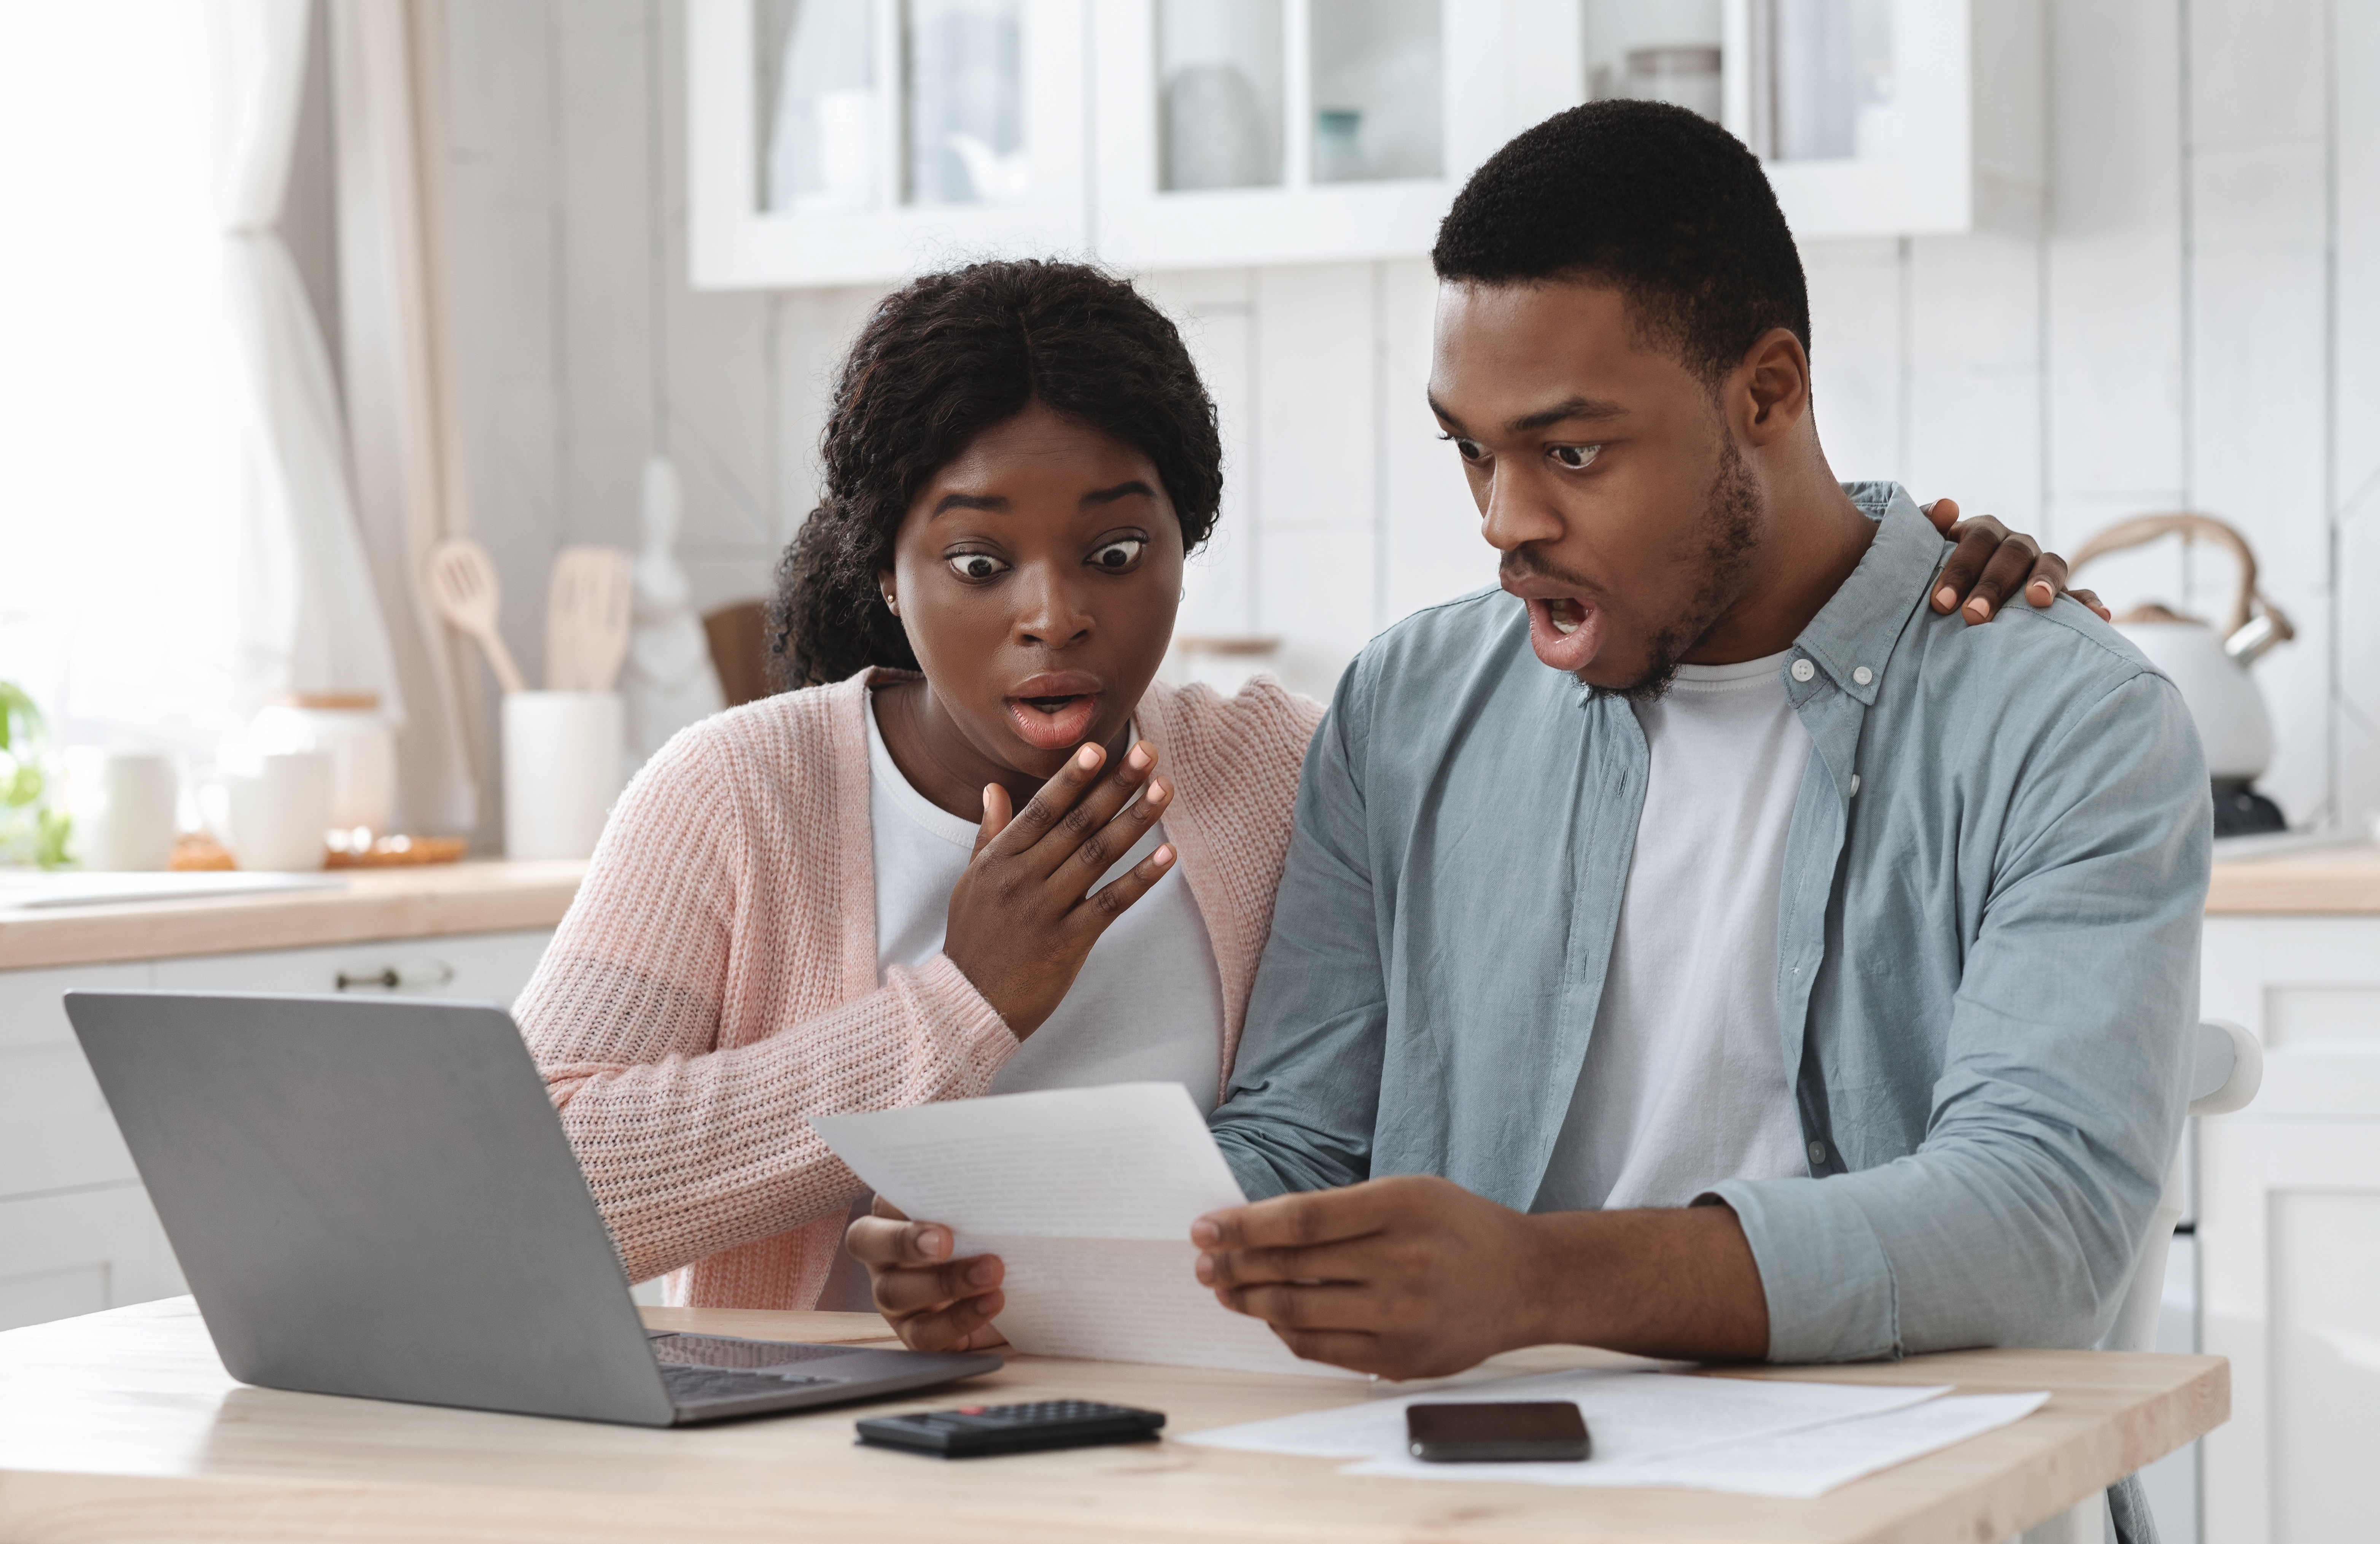 Shocked black couple in kitchen having financial problems, doing family budget calculations | Source: Getty Images